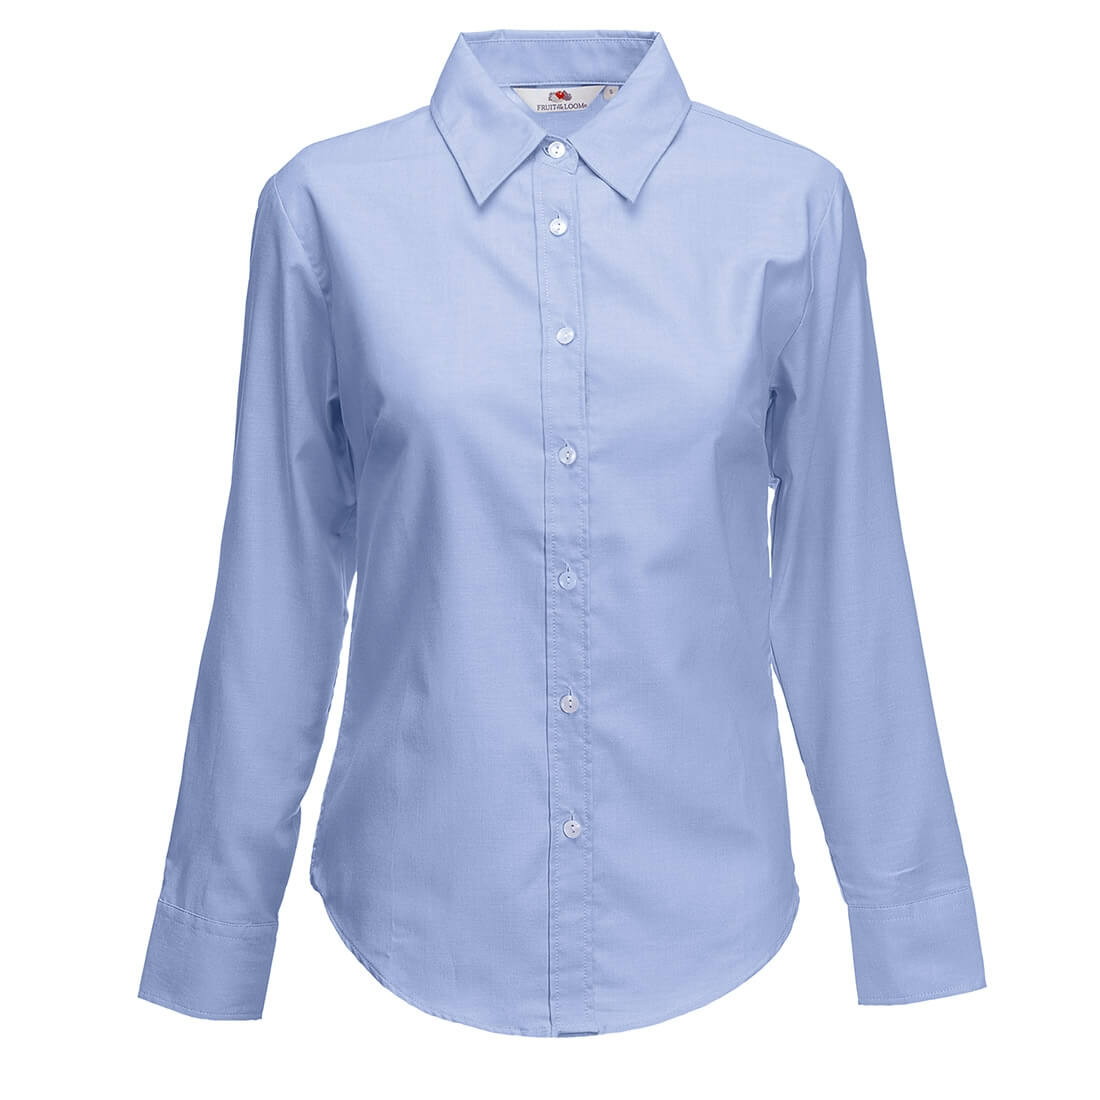 Lady-Fit Long Sleeve Oxford Shirt - Arbeitskleidung